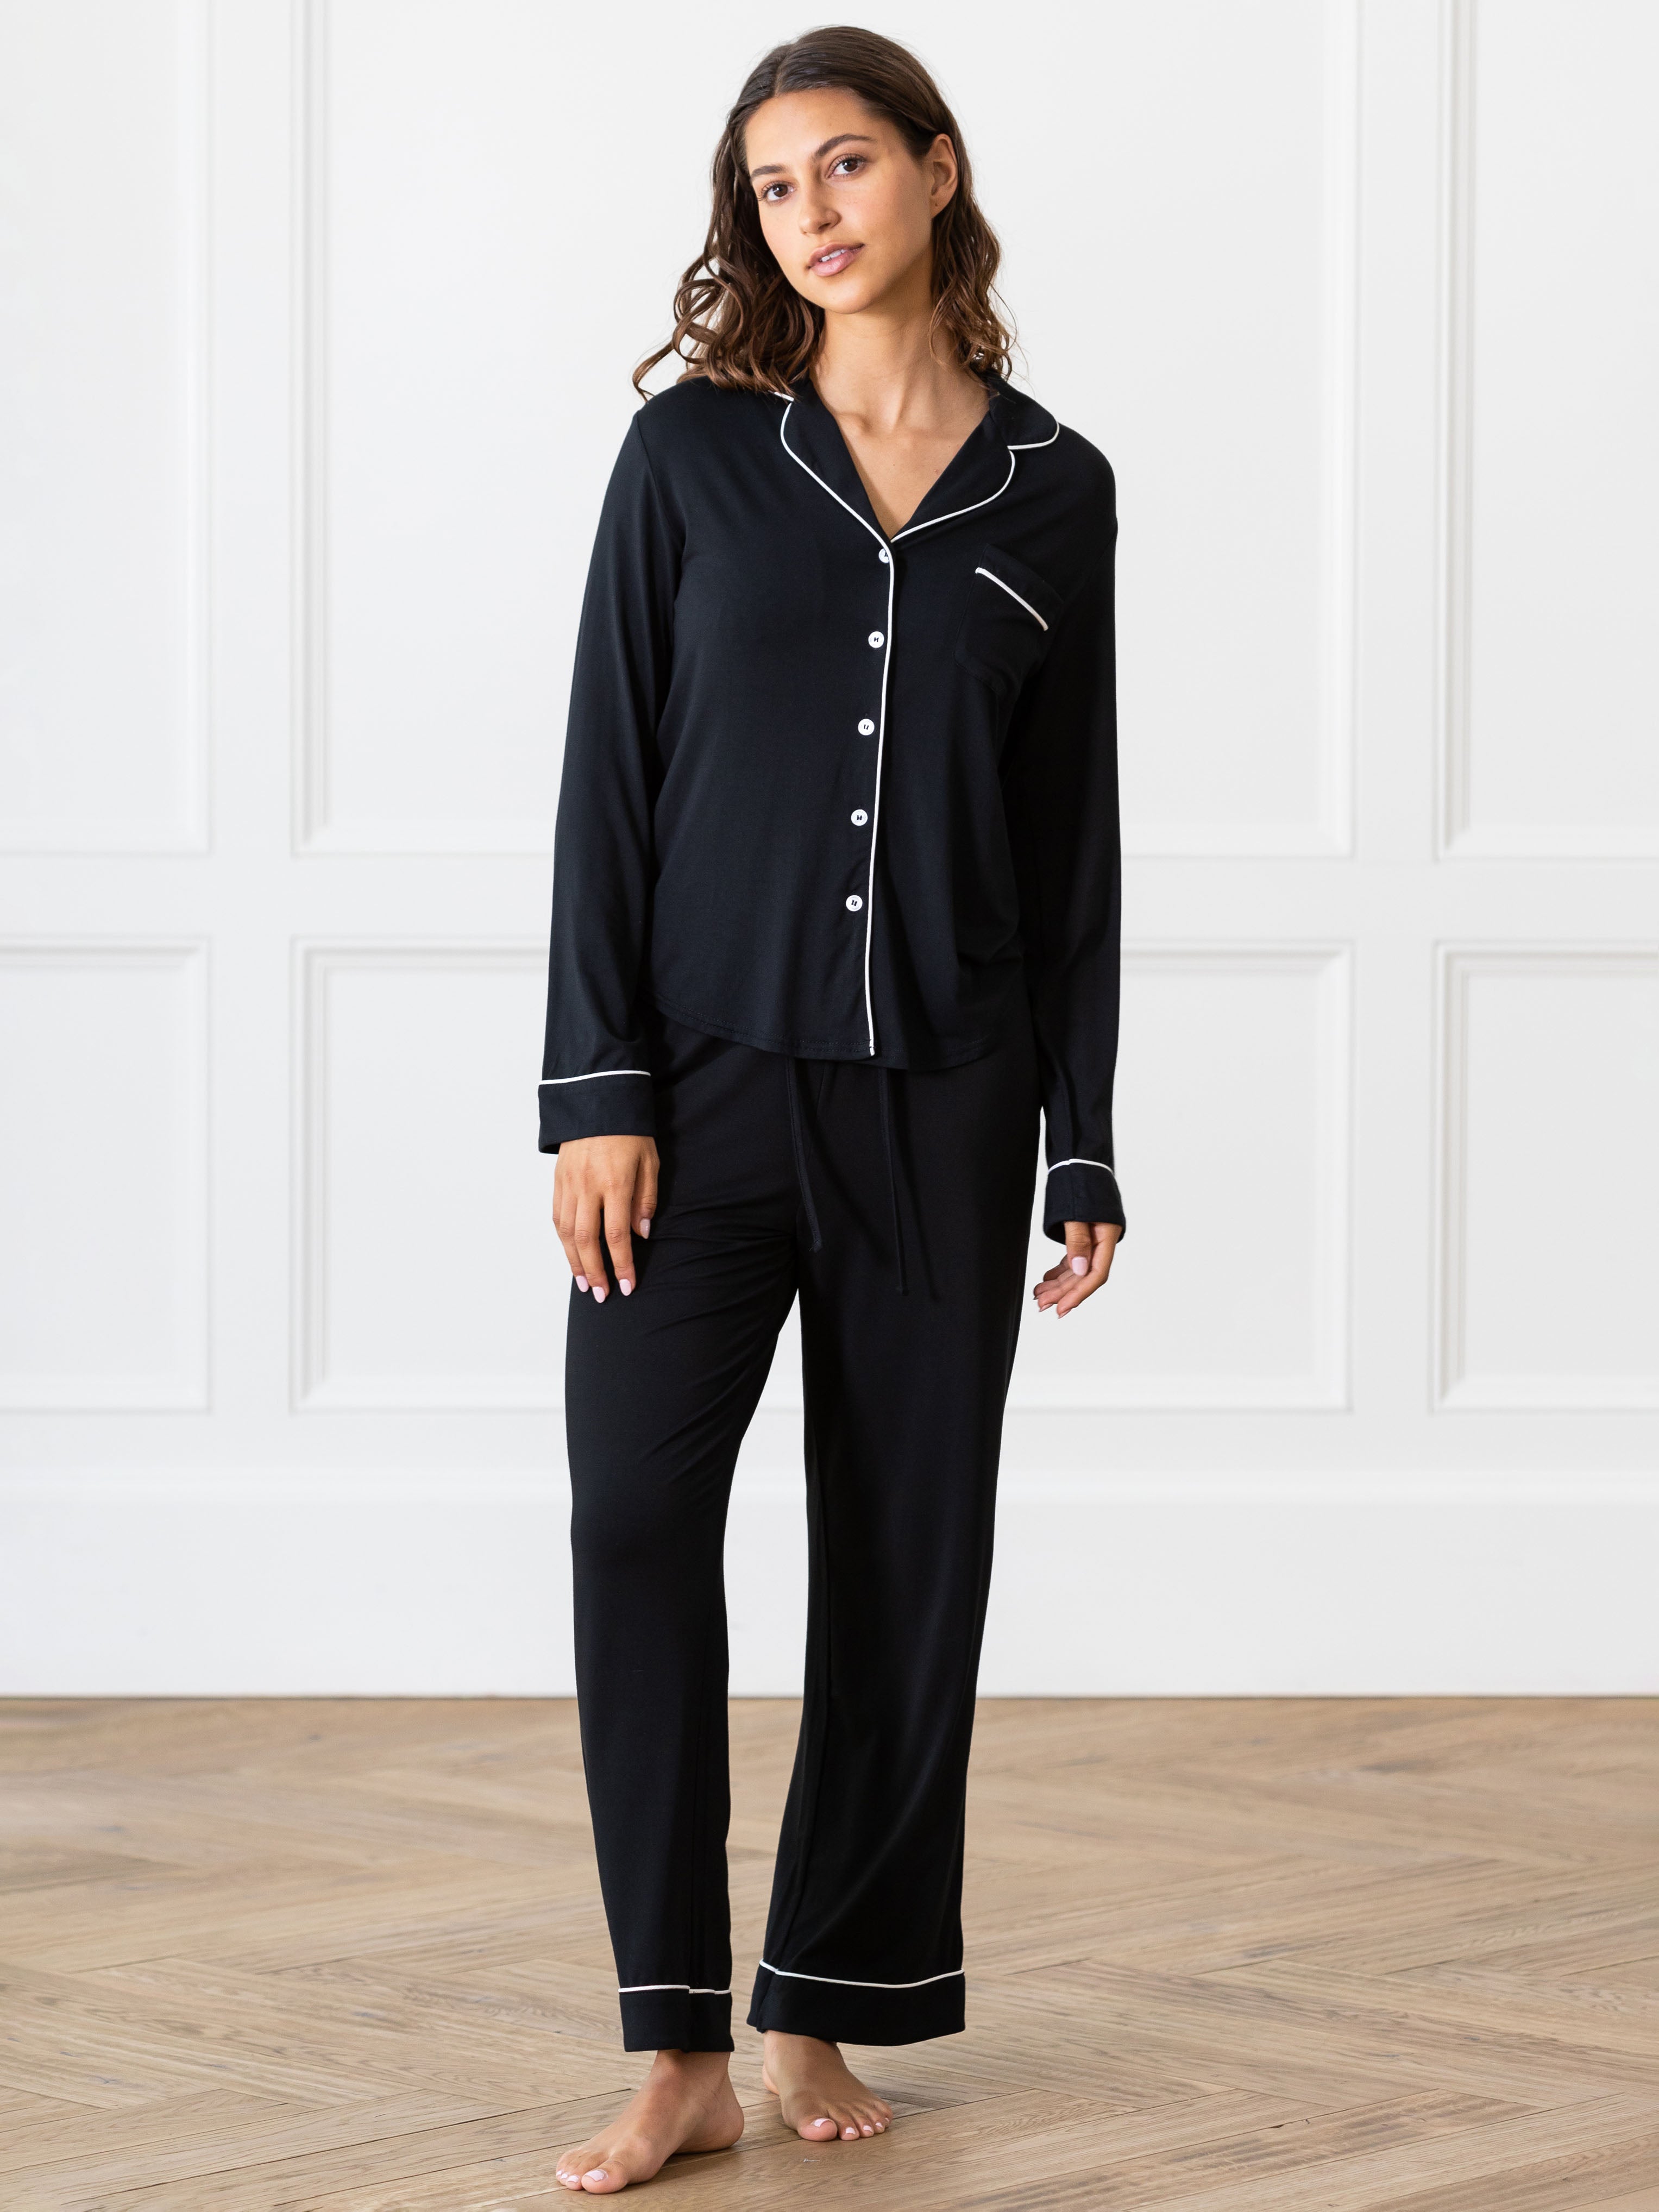 Black Long Sleeve Pajama Set modeled by a woman. The photo was taken in a light setting, showing off the colors and lines of the pajamas. |Color:Black